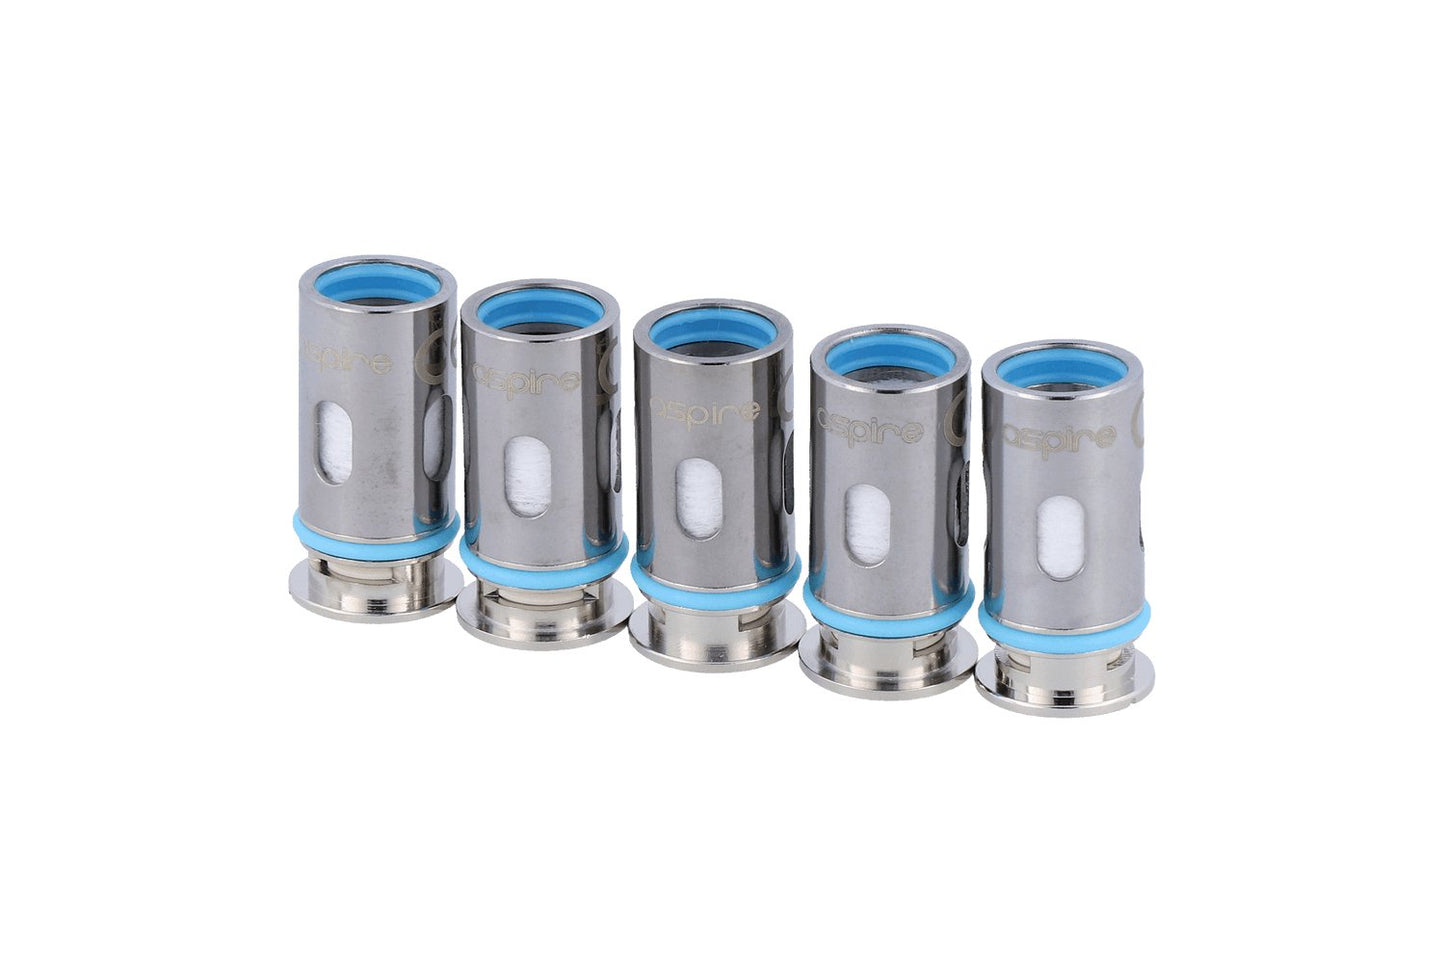 Aspire - BP - Heads 0,6 Ohm / 0,3 Ohm (5 Stück pro Packung) - 1er Packung 0,3 Ohm - Vapes4you